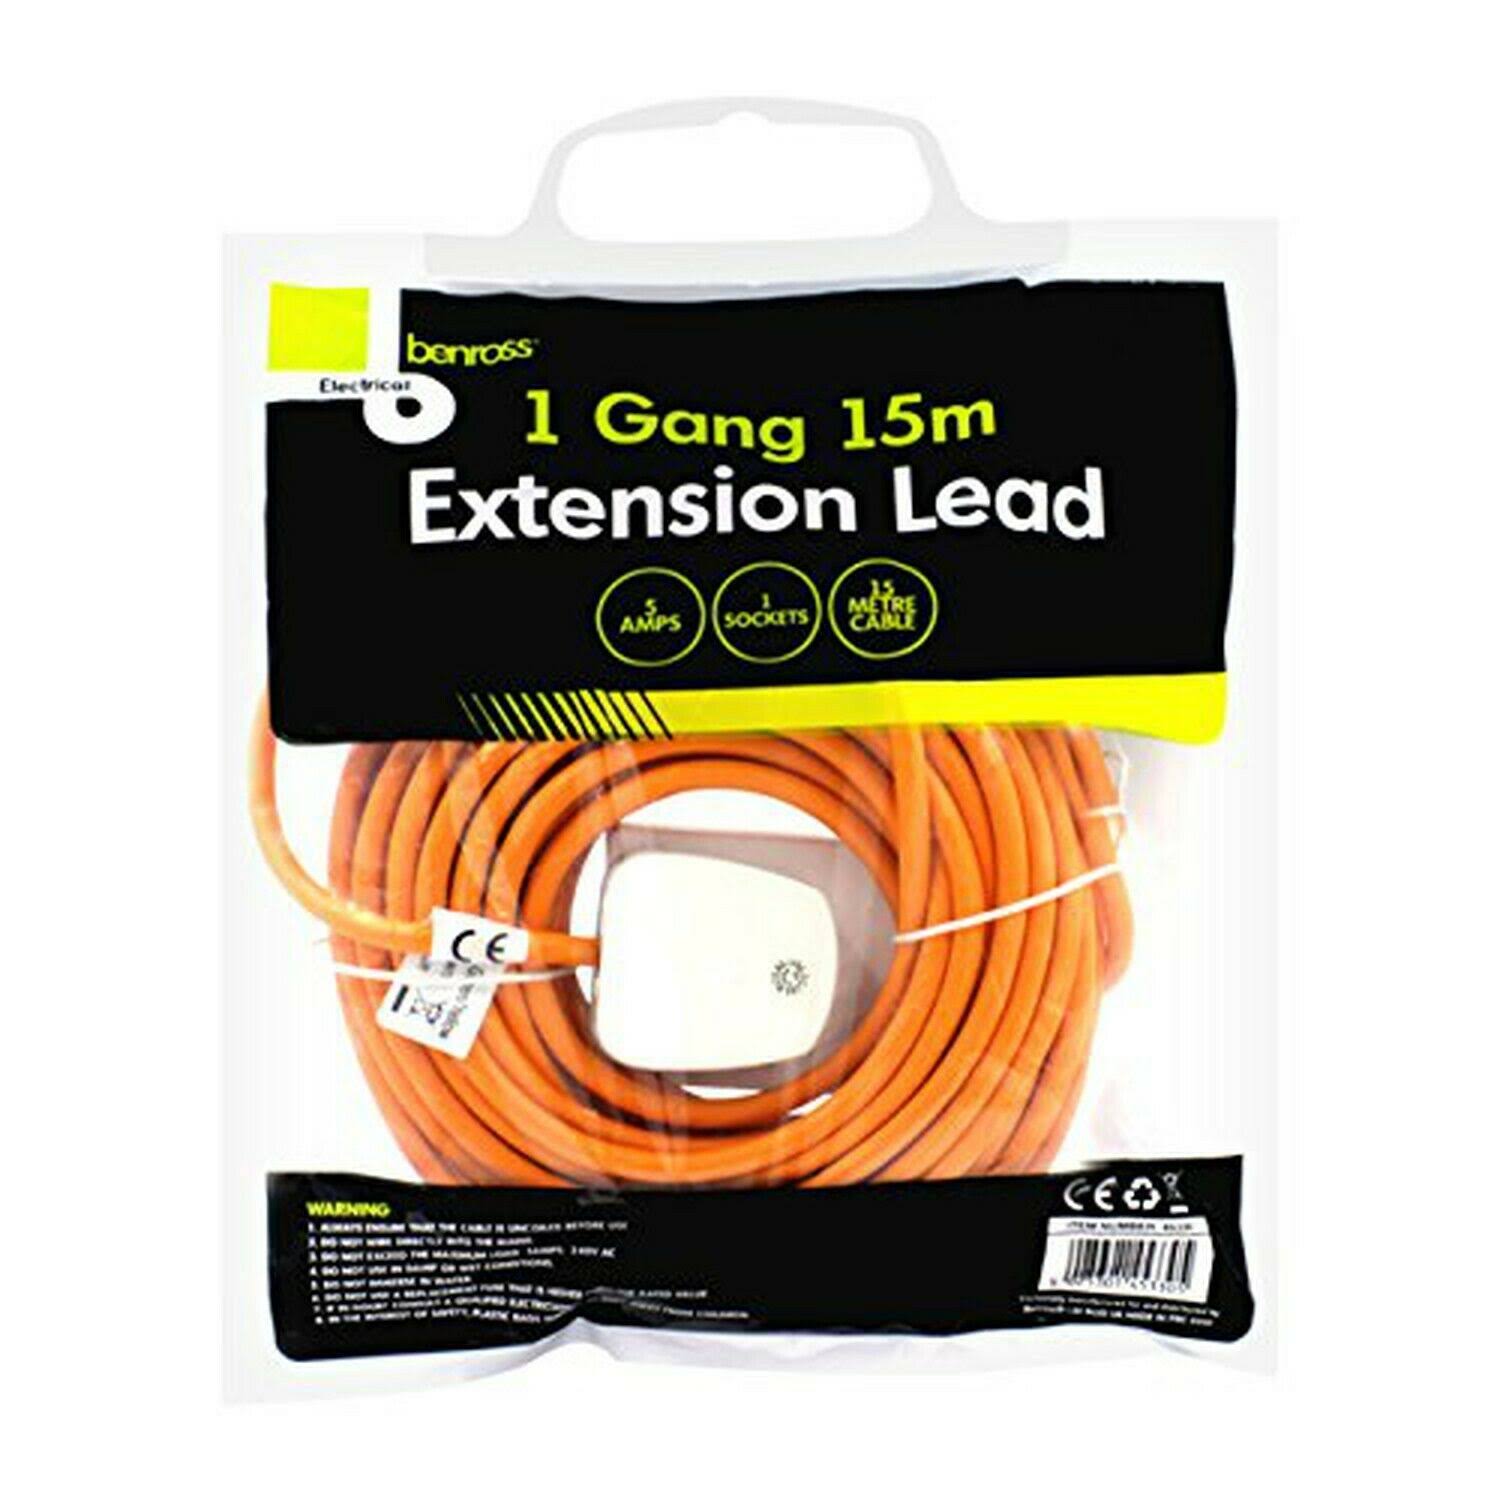 Benross 45330 1-Way Extension Lead with 15M Cable, Orange